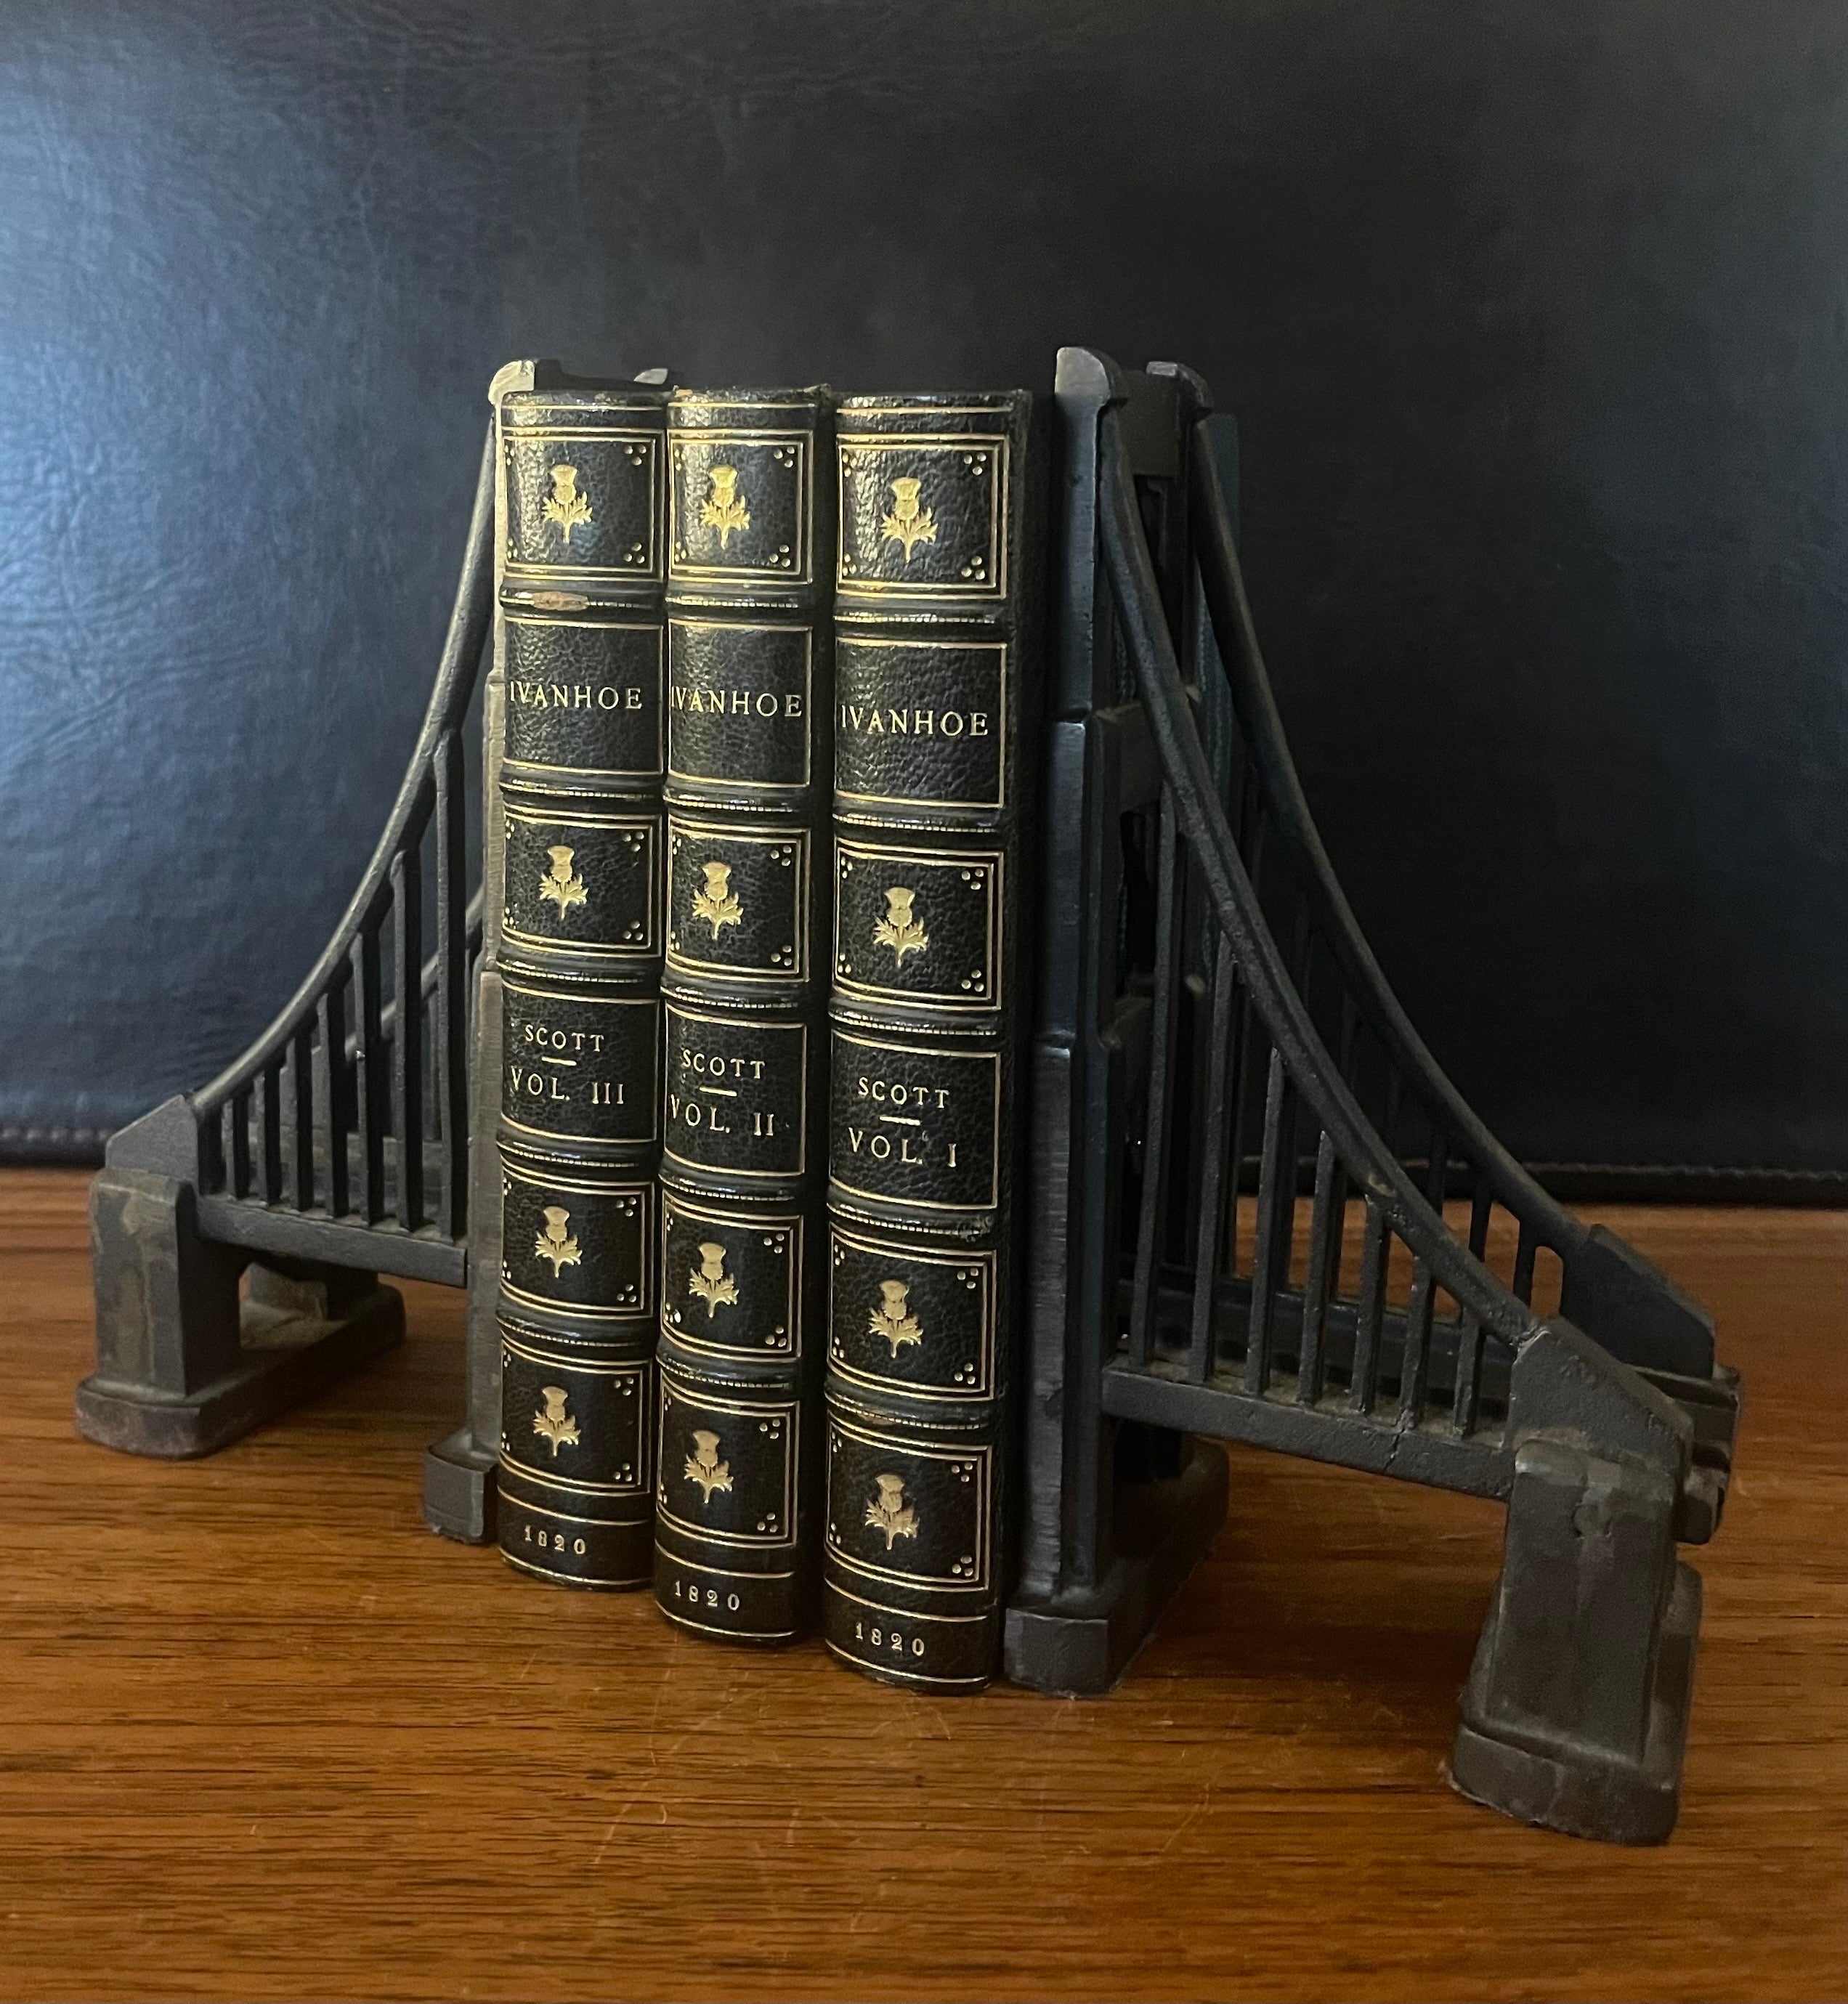 Attractive pair of cast iron supension bridge bookends, circa 2000s. They are quite heavy, in original condition with a nice patina and measure 8.25